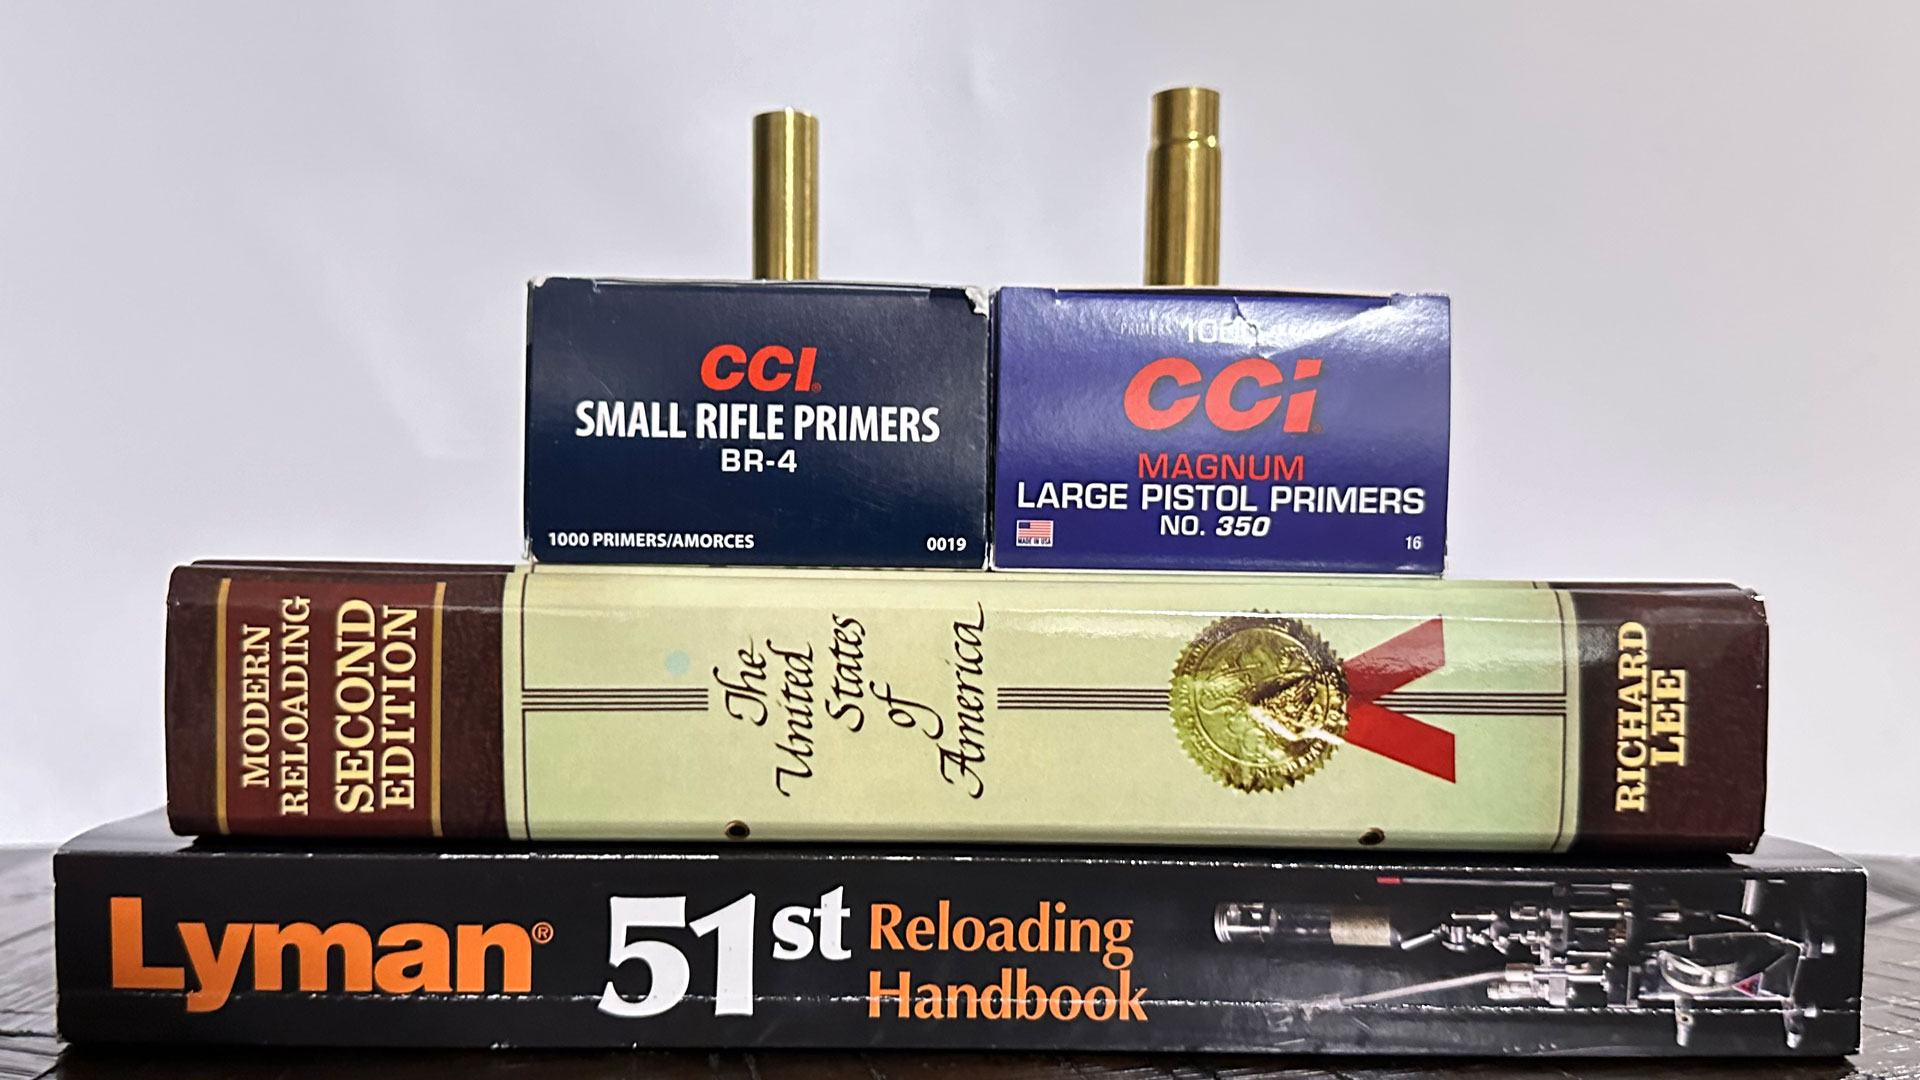 Reloading manuals, primers and shells